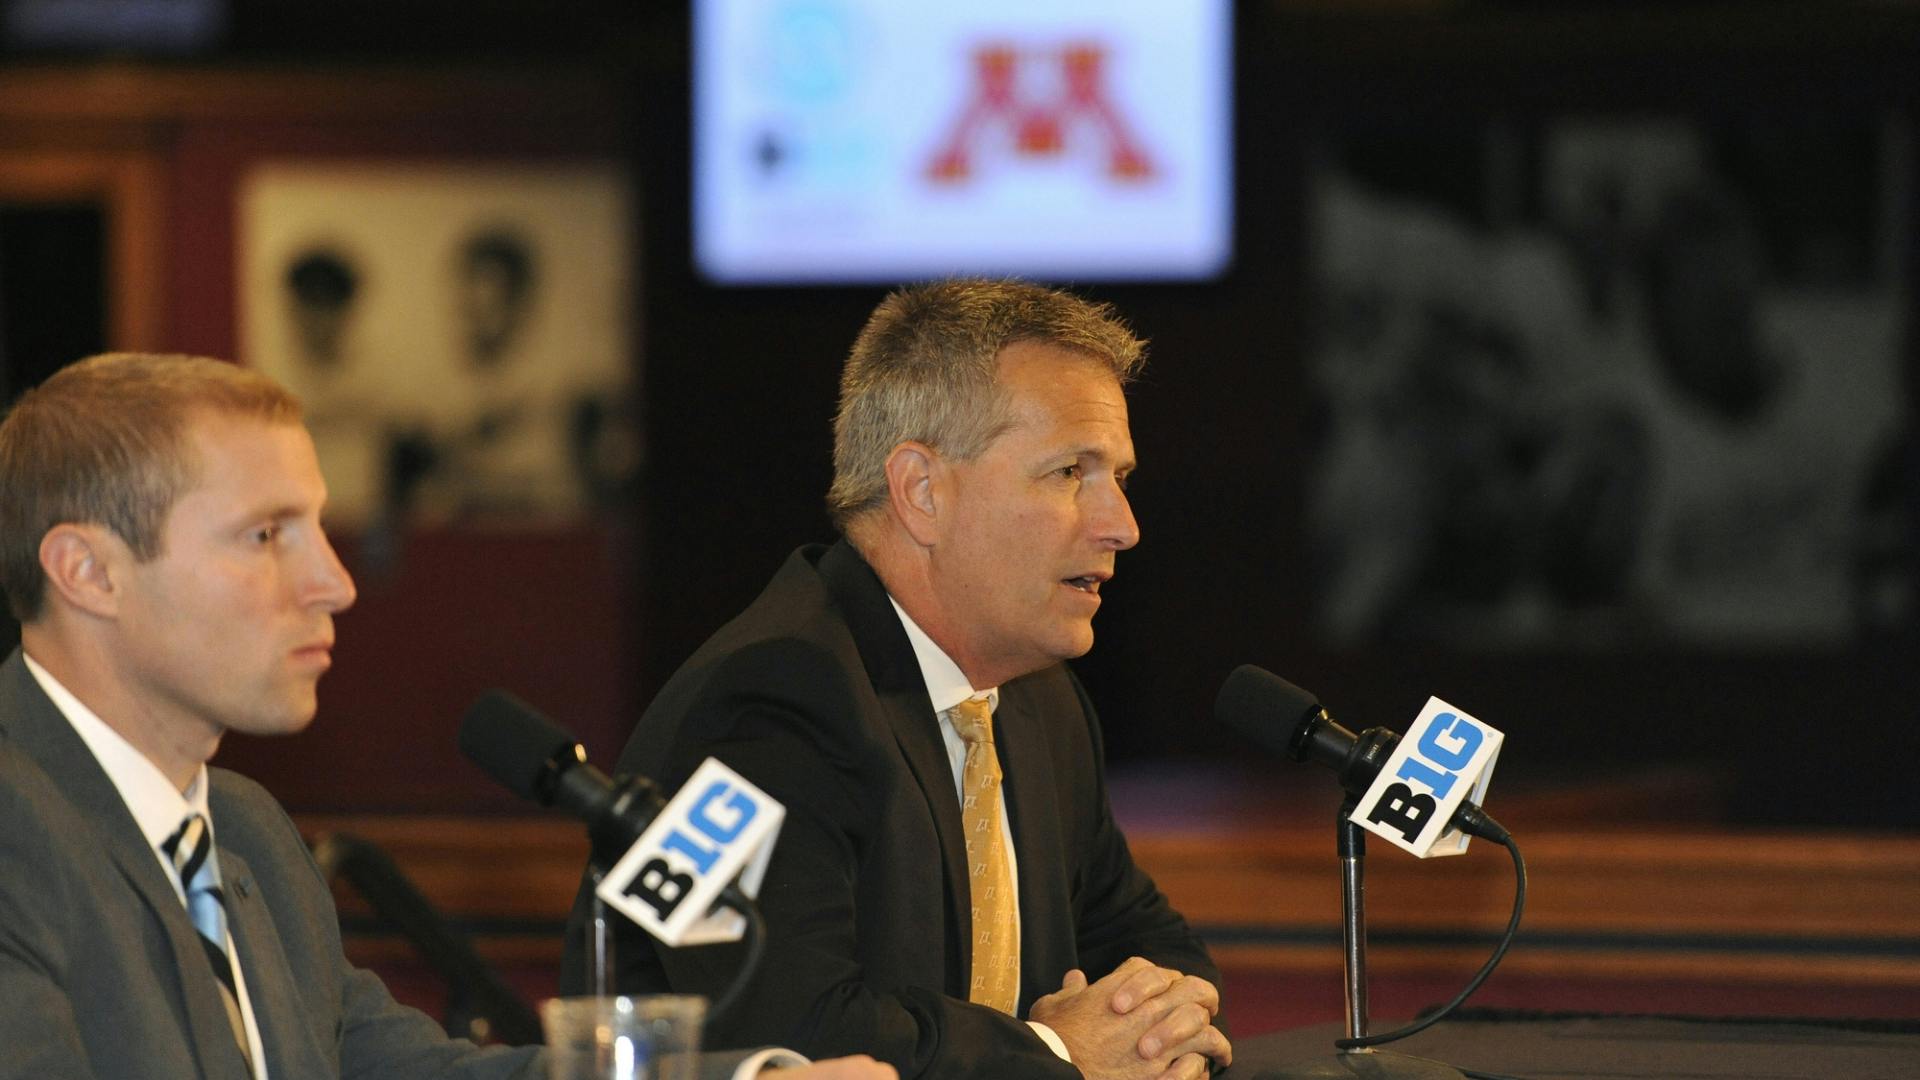 Gophers coach Don Lucia previews the upcoming road trip to Michigan State.